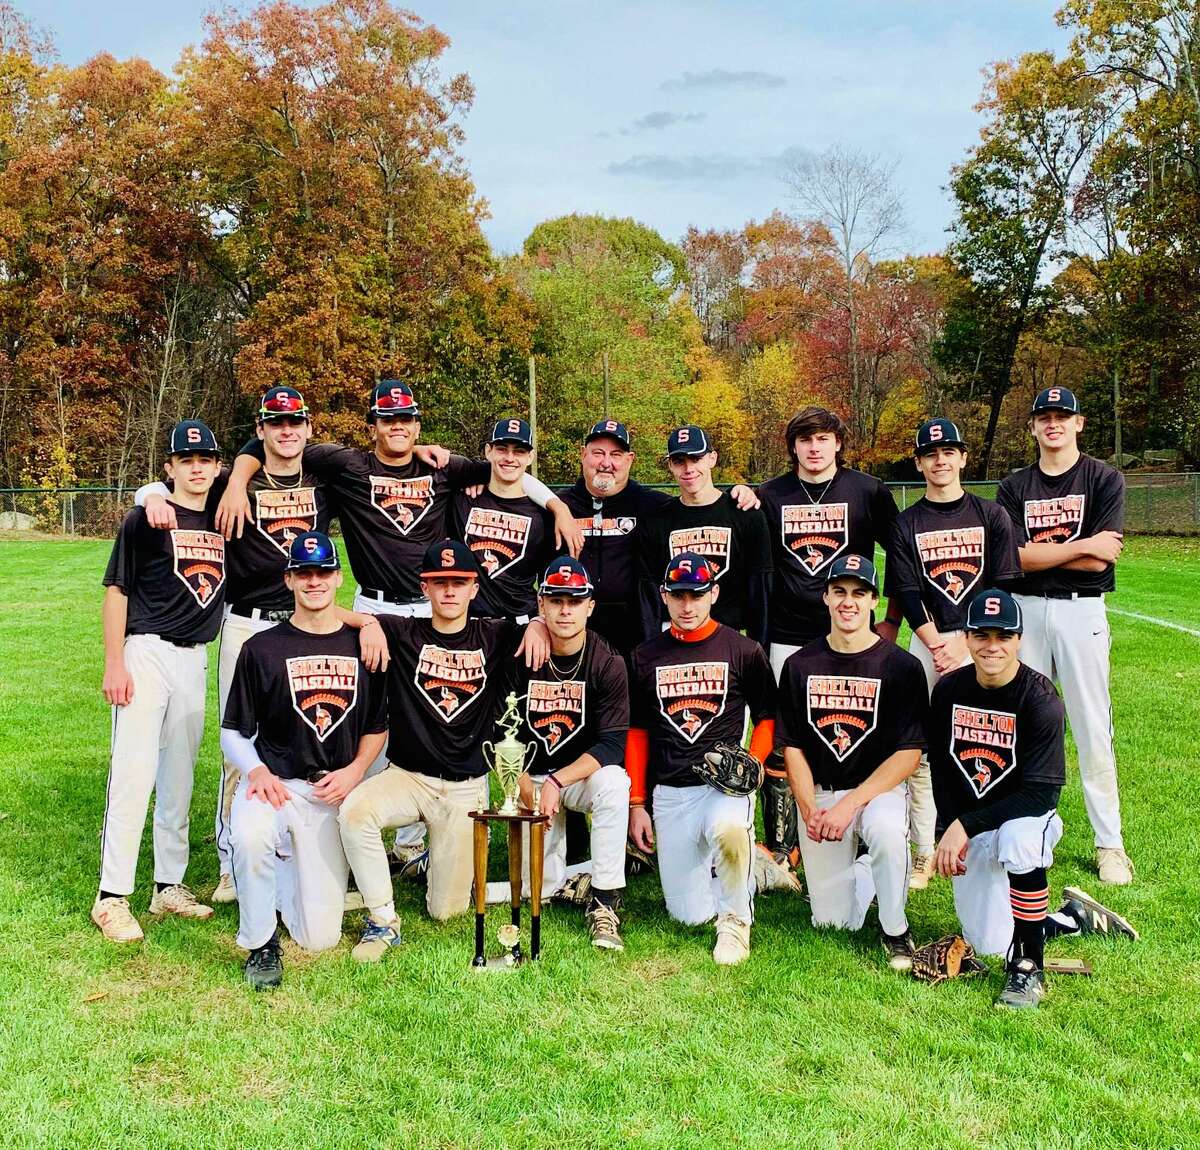 Shelton Gaels Fall Ball earned the Connecticut Elite Baseball Fall Ball championship and finished with a 13-0 record. Team members (front row) are: Spencer Keith, Tommy Connery, Will Berardi, John Riccio, Joseph Ciccone and Benny Van Tine; (second row) Ryan Hafele, Max McLoughlin, Anthony Steele, John Horahan, manager Mike Riccio, Matt Janik, Devin Zak, Andrew Hafele and Ryan Blakslee.